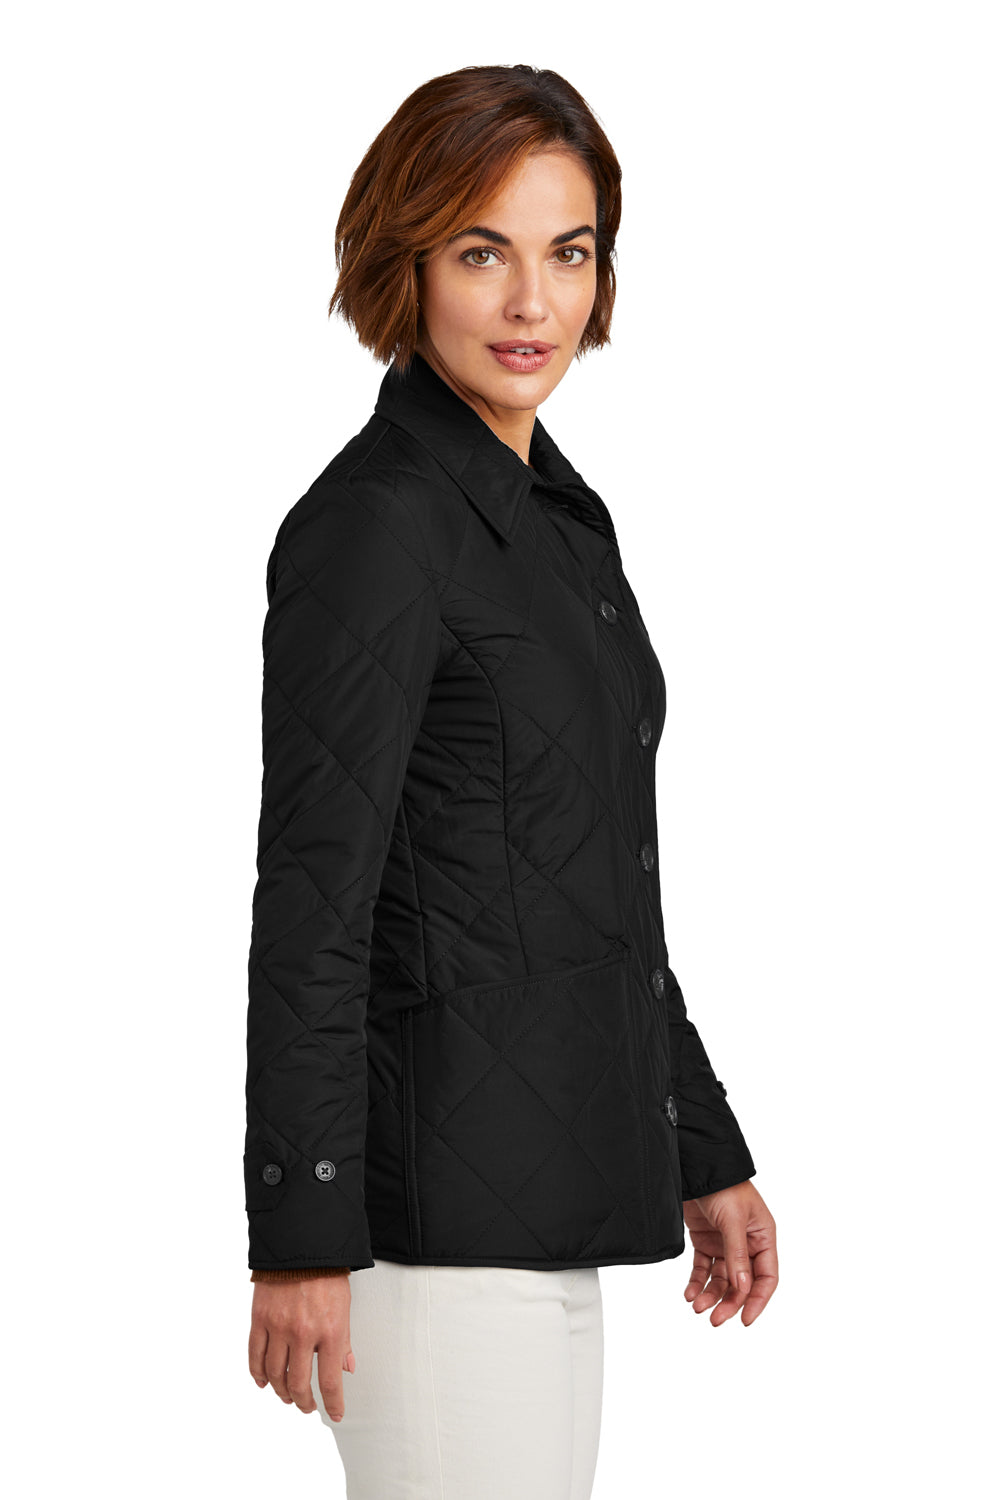 Brooks Brothers Womens Water Resistant Quilted Full Zip Jacket Deep Black Model Side